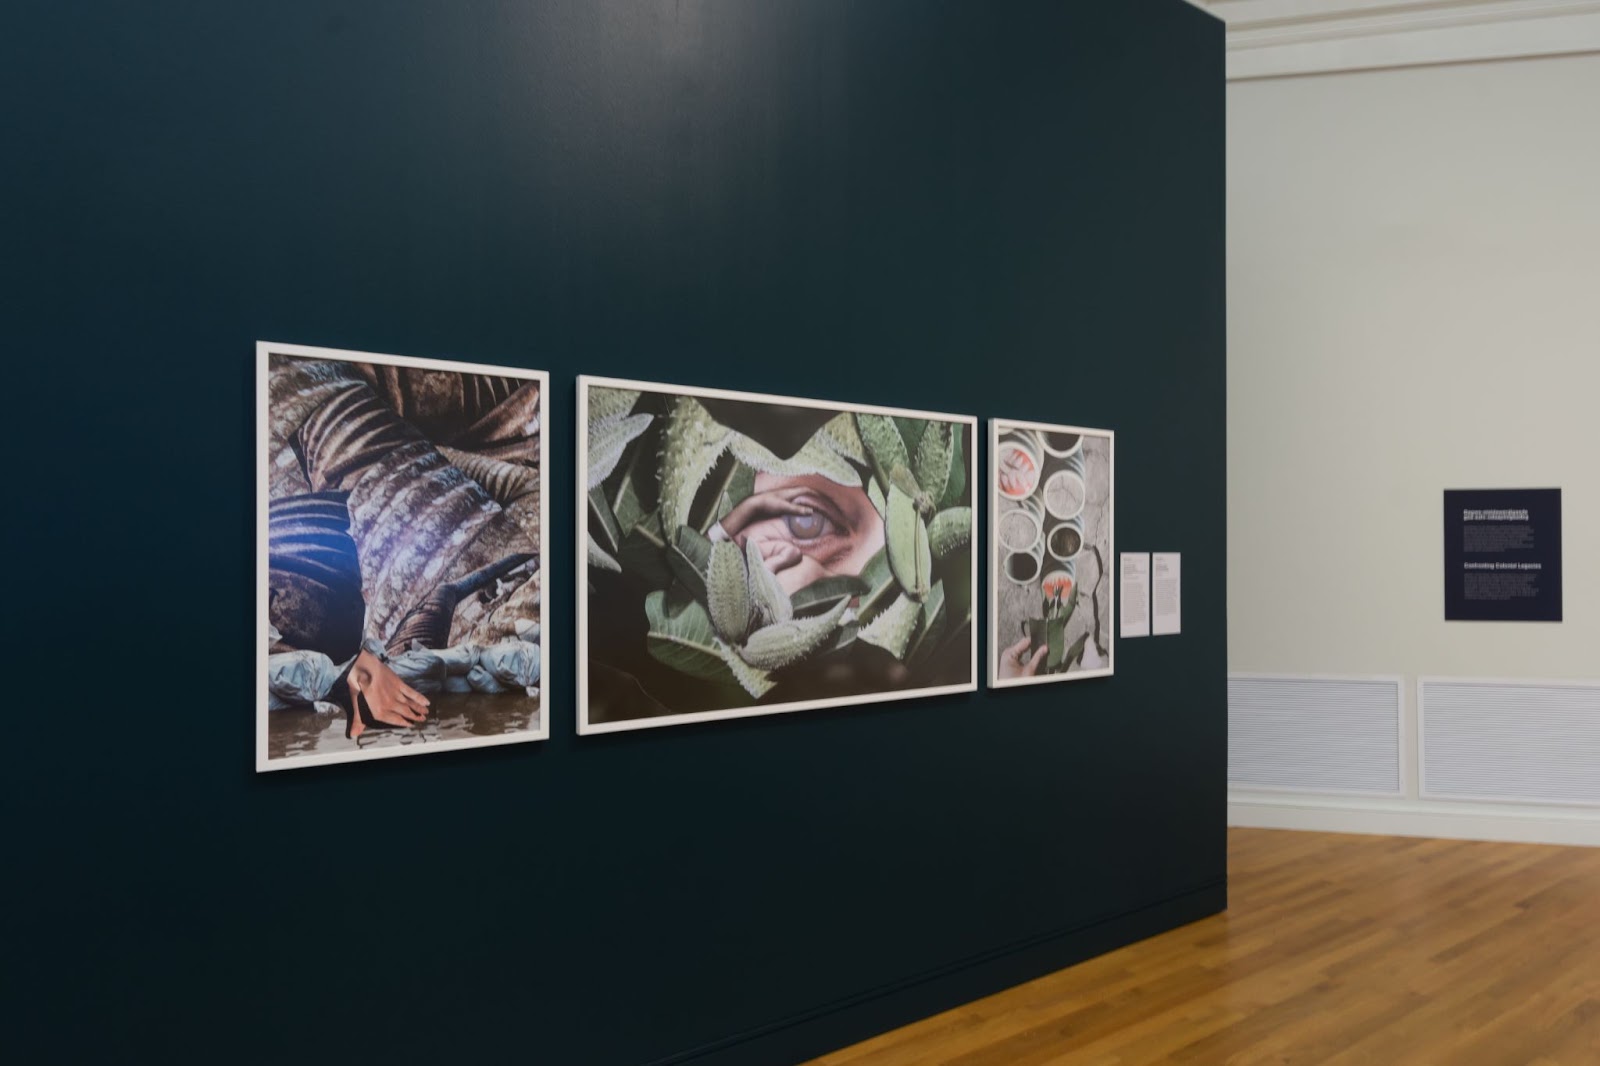 Three larged framed pieces are hanging on a dark green wall. They all appear to be photographs that are chopped up and rearranged together. The biggest one is a human eye with green leaves around it.